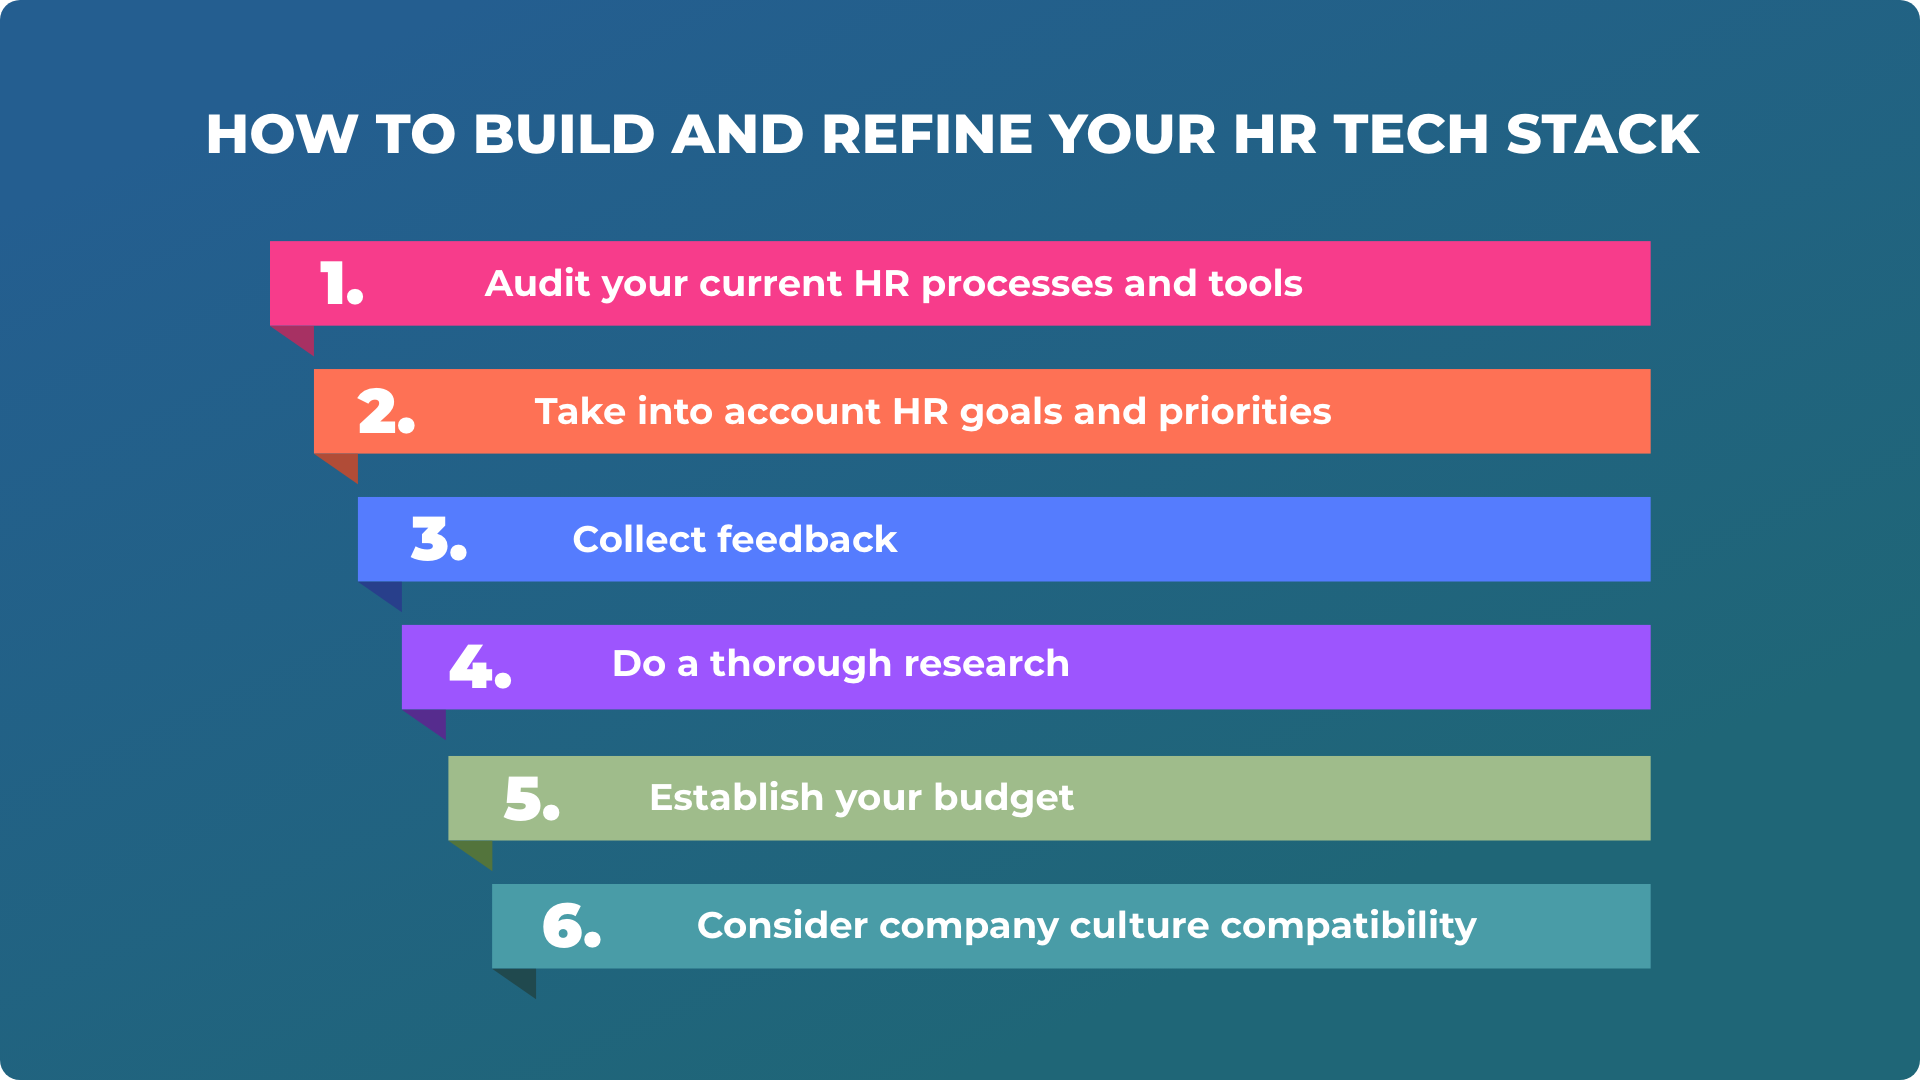 How to build and refine your HR tech stack